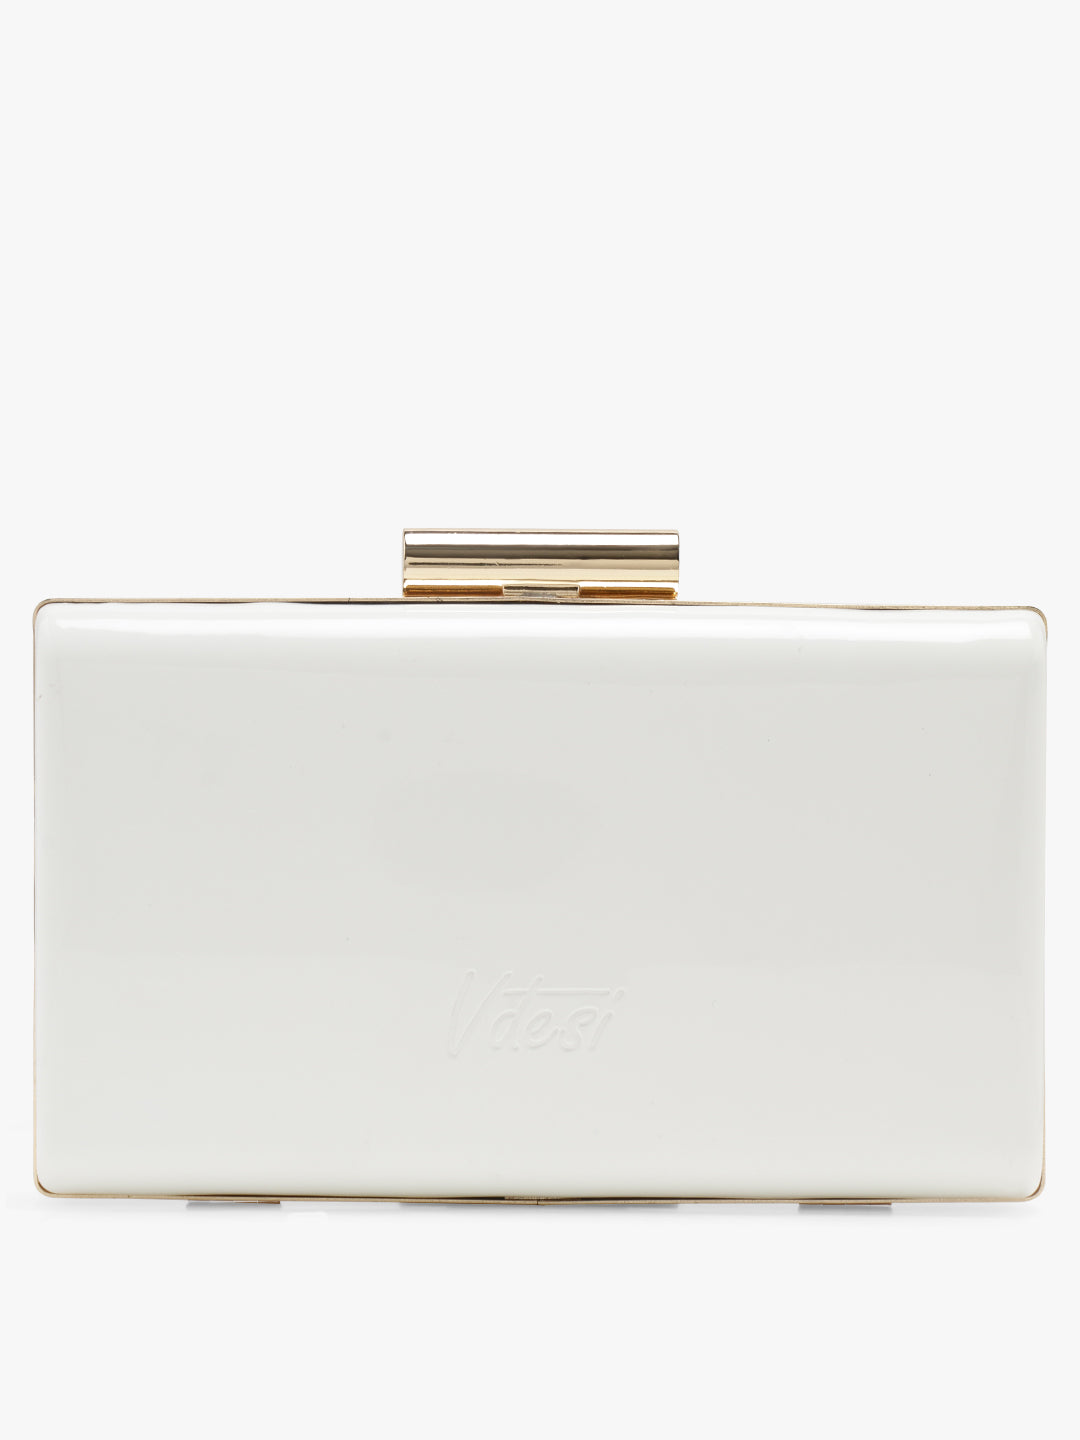 Designed to impress, this clutch features a dazzling exterior that adds instant glamour to any outfit.